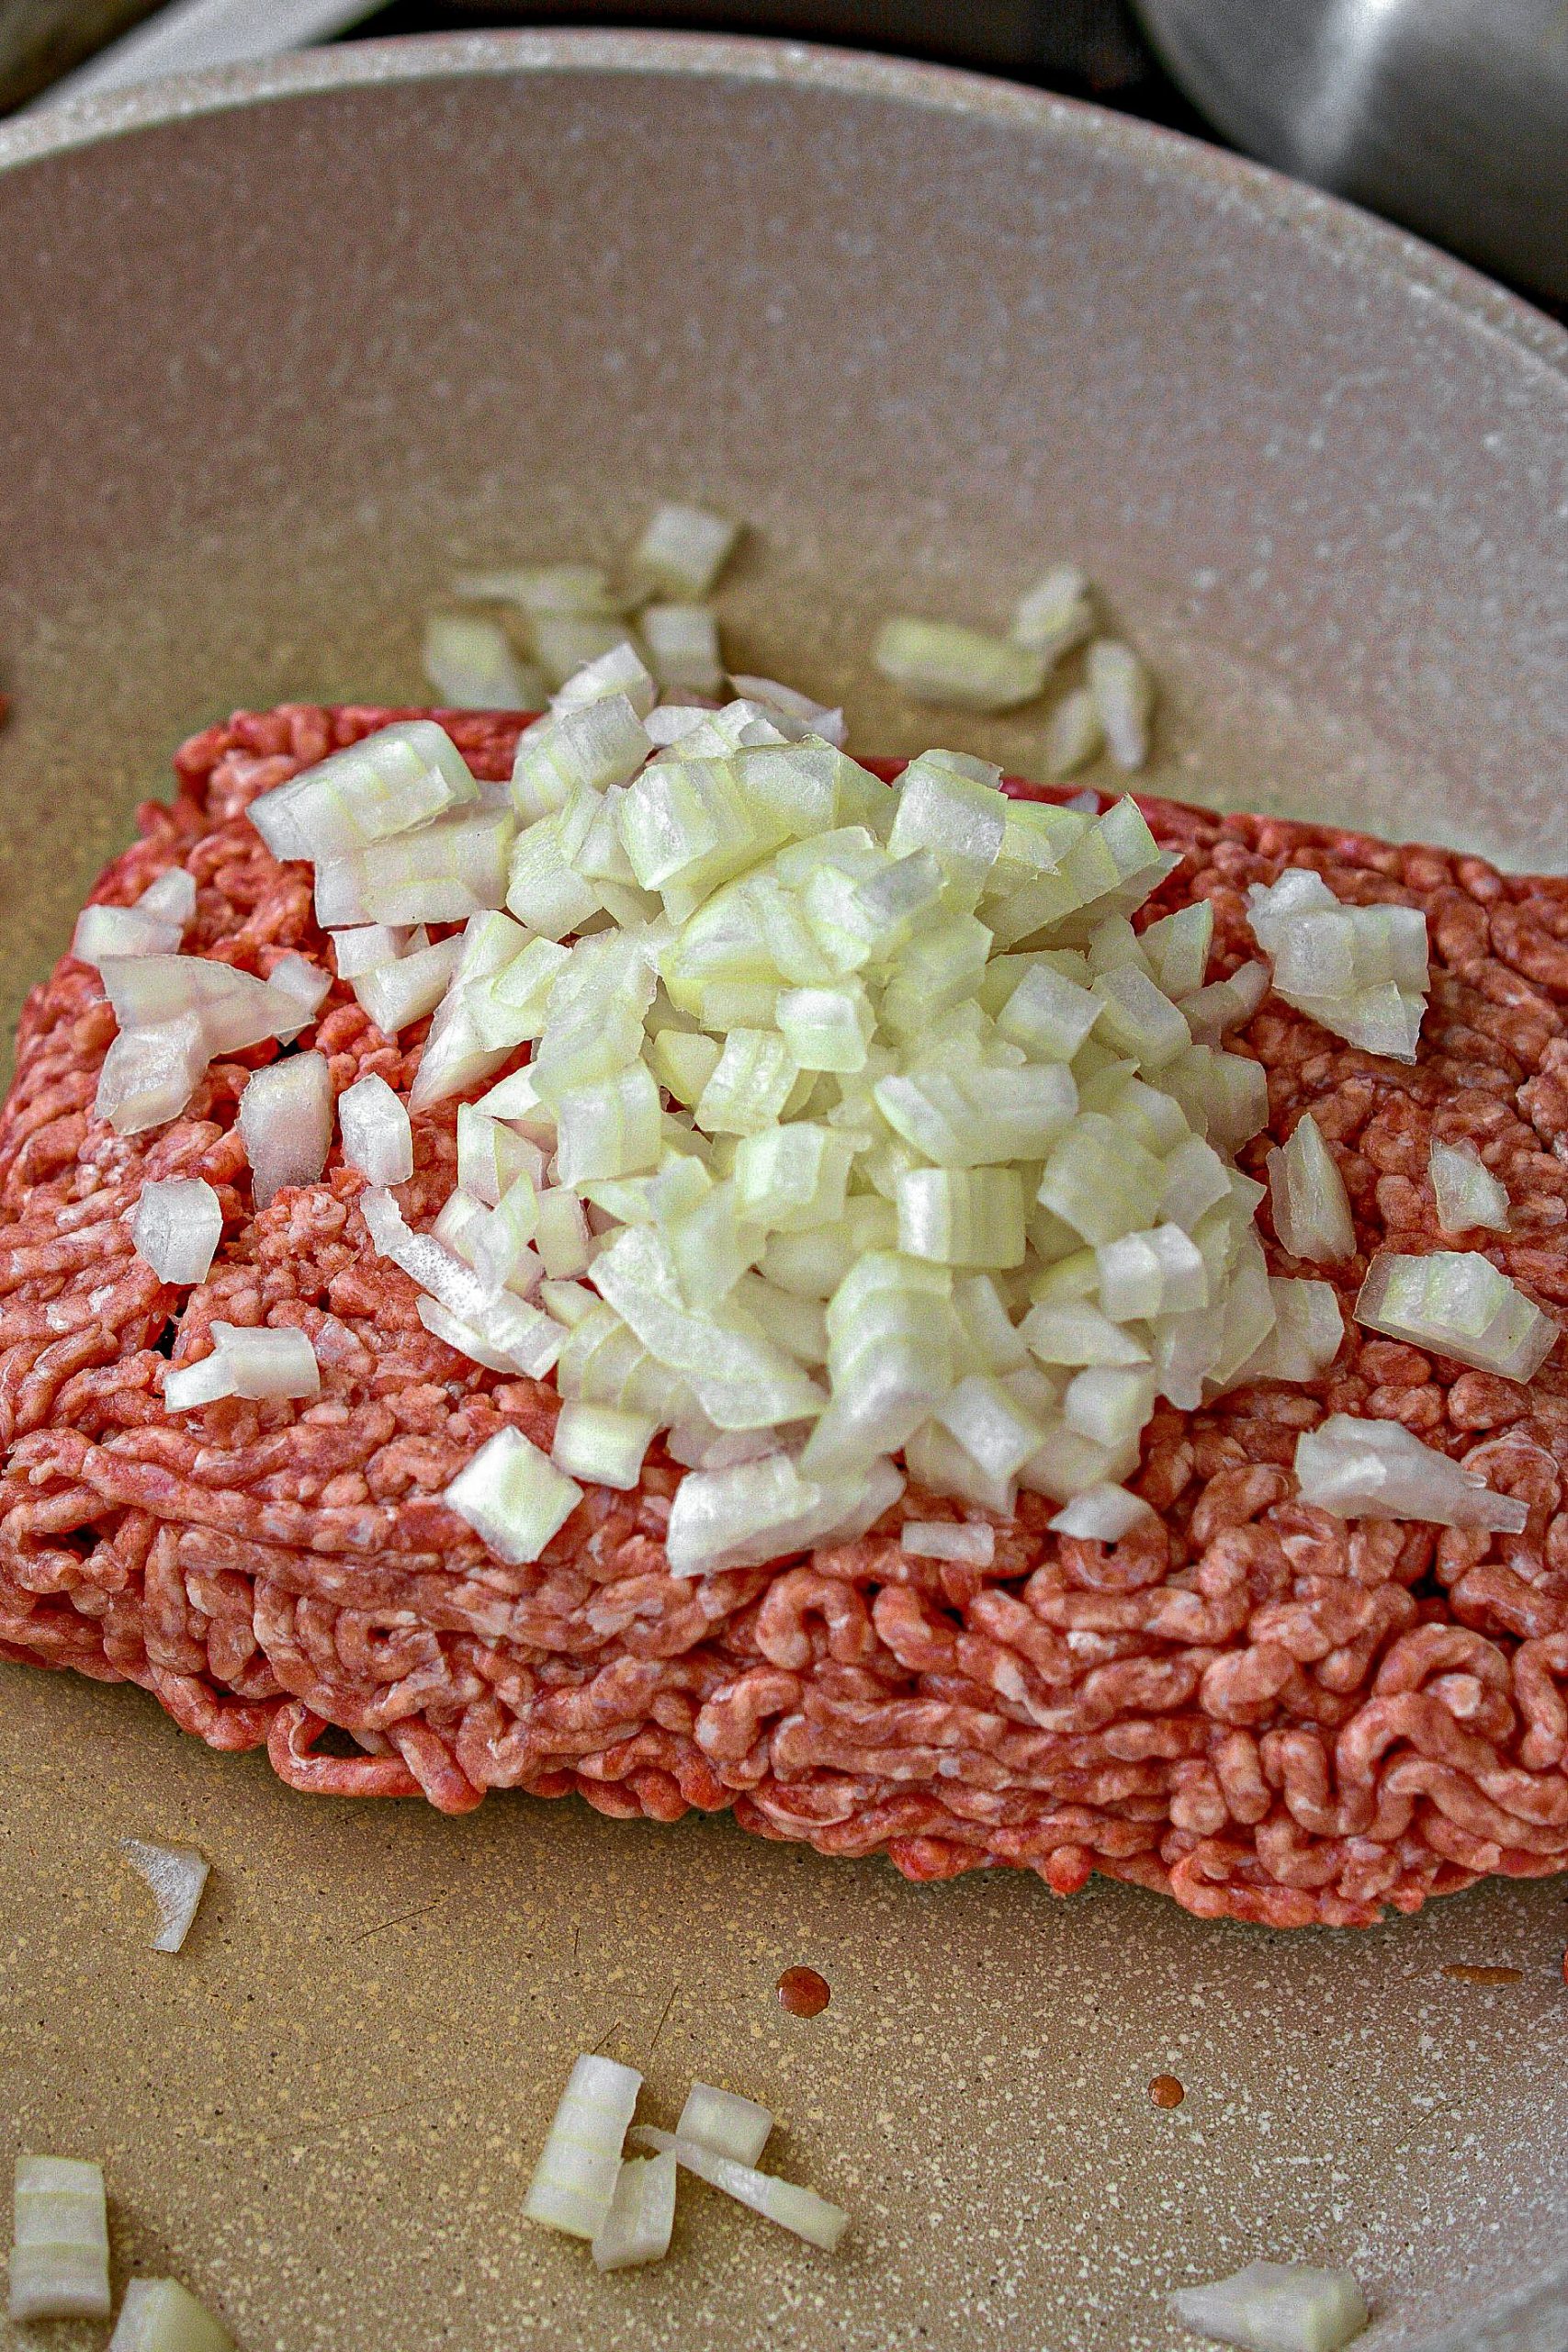 Place the ground beef and onion into a large skillet over medium-high heat on the stove. 